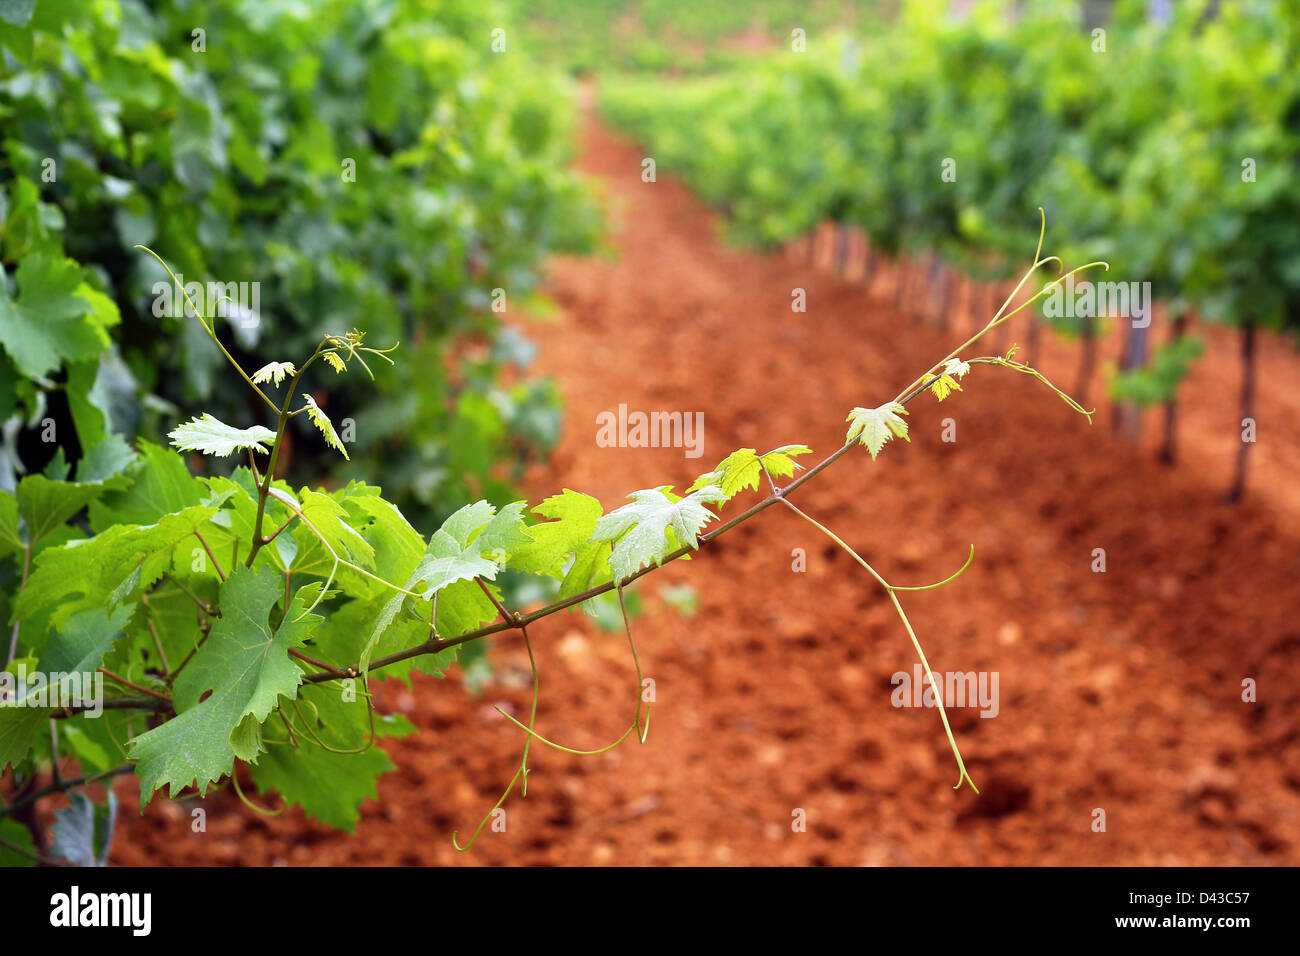 French vineyard, focus on the vine branch Stock Photo